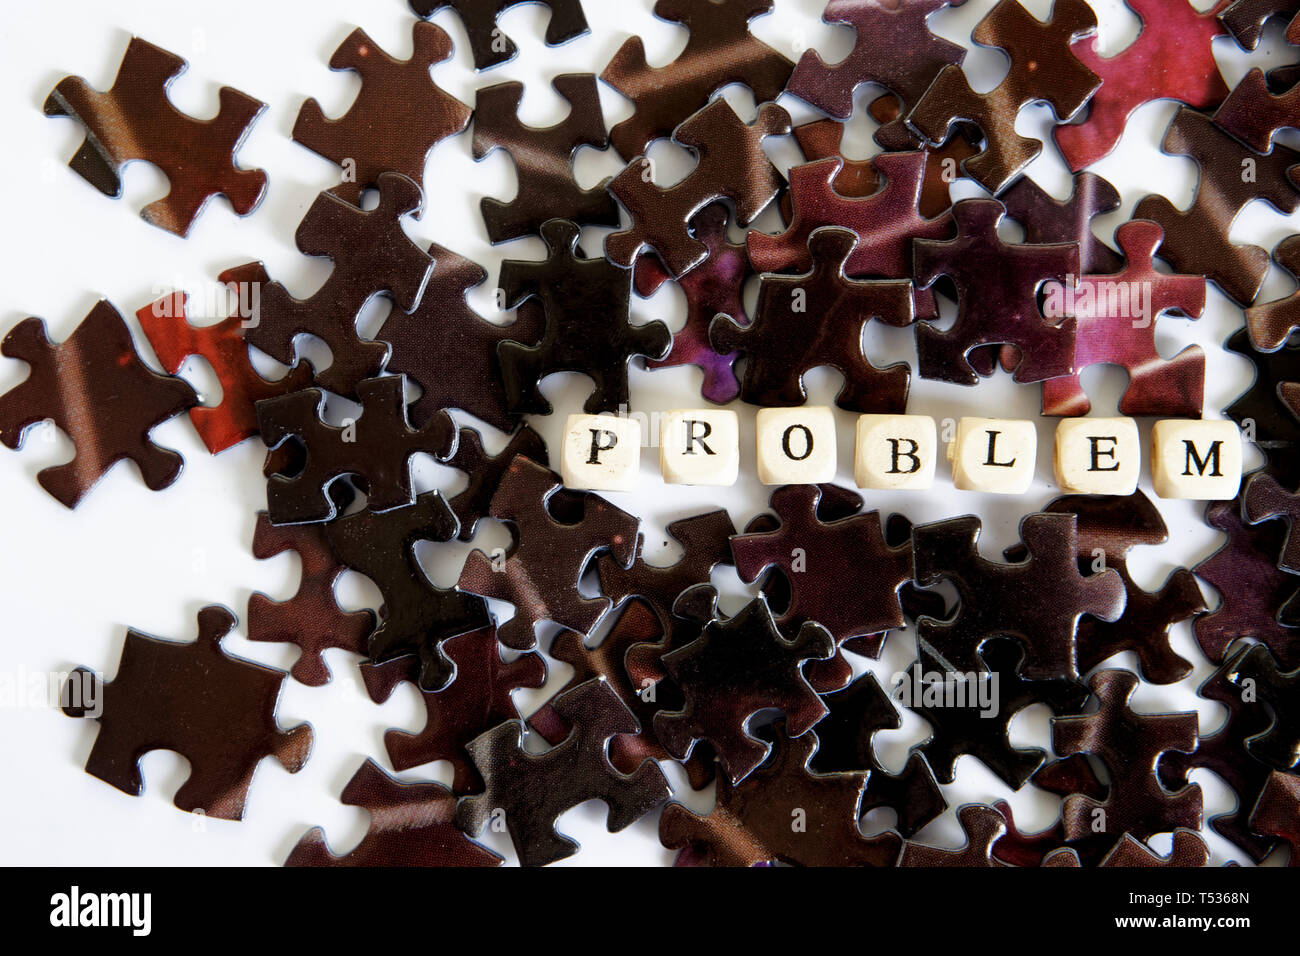 Solving complex problems. Assembling puzzles. Opportunities out of the problem situation. White background. Stock Photo